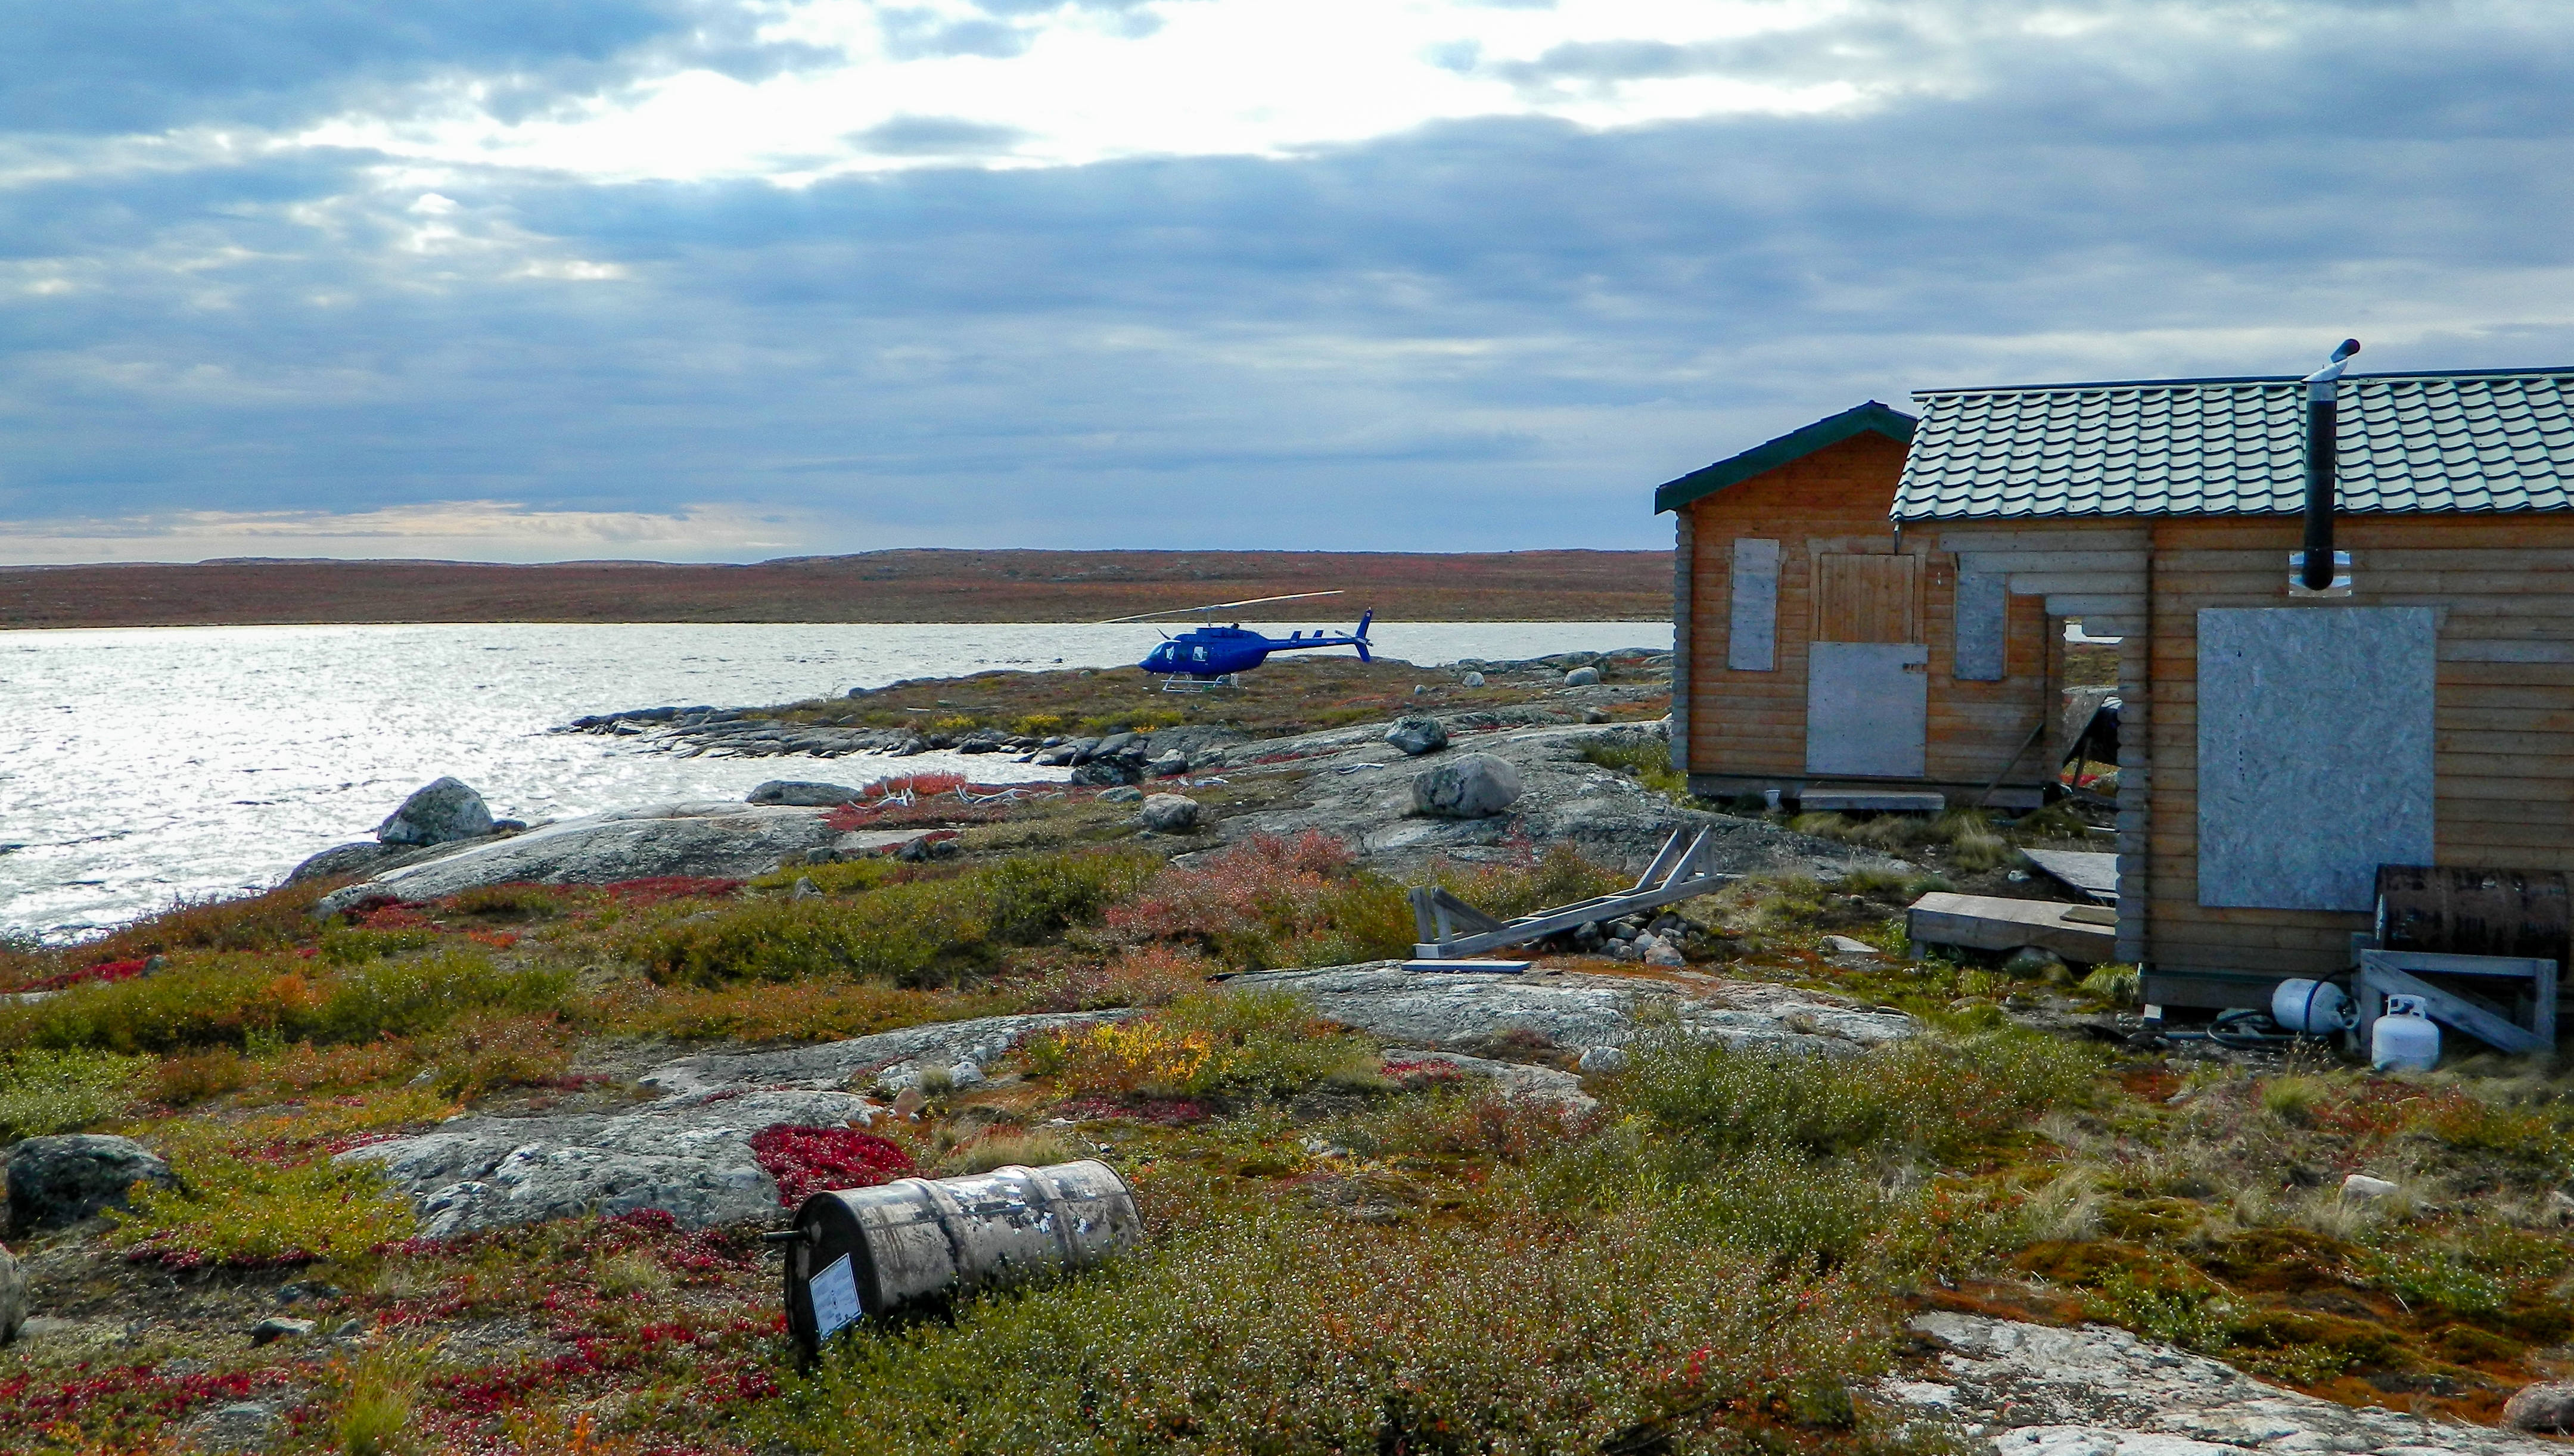 A helicopter by derelict buildings in the remote NWT